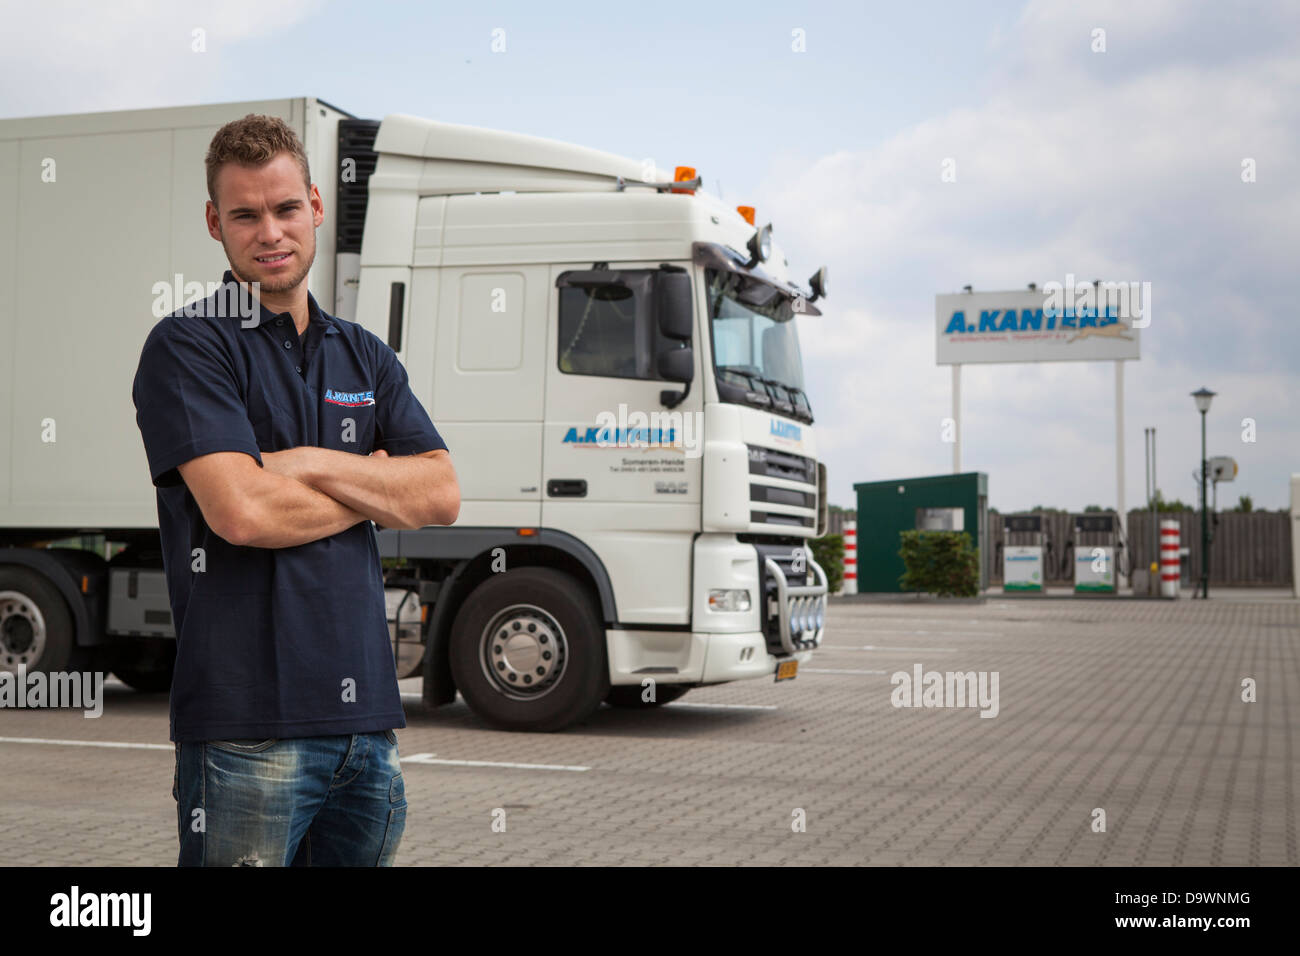 Proud driver posing in front of a truck with the company petrol station in the background Stock Photo